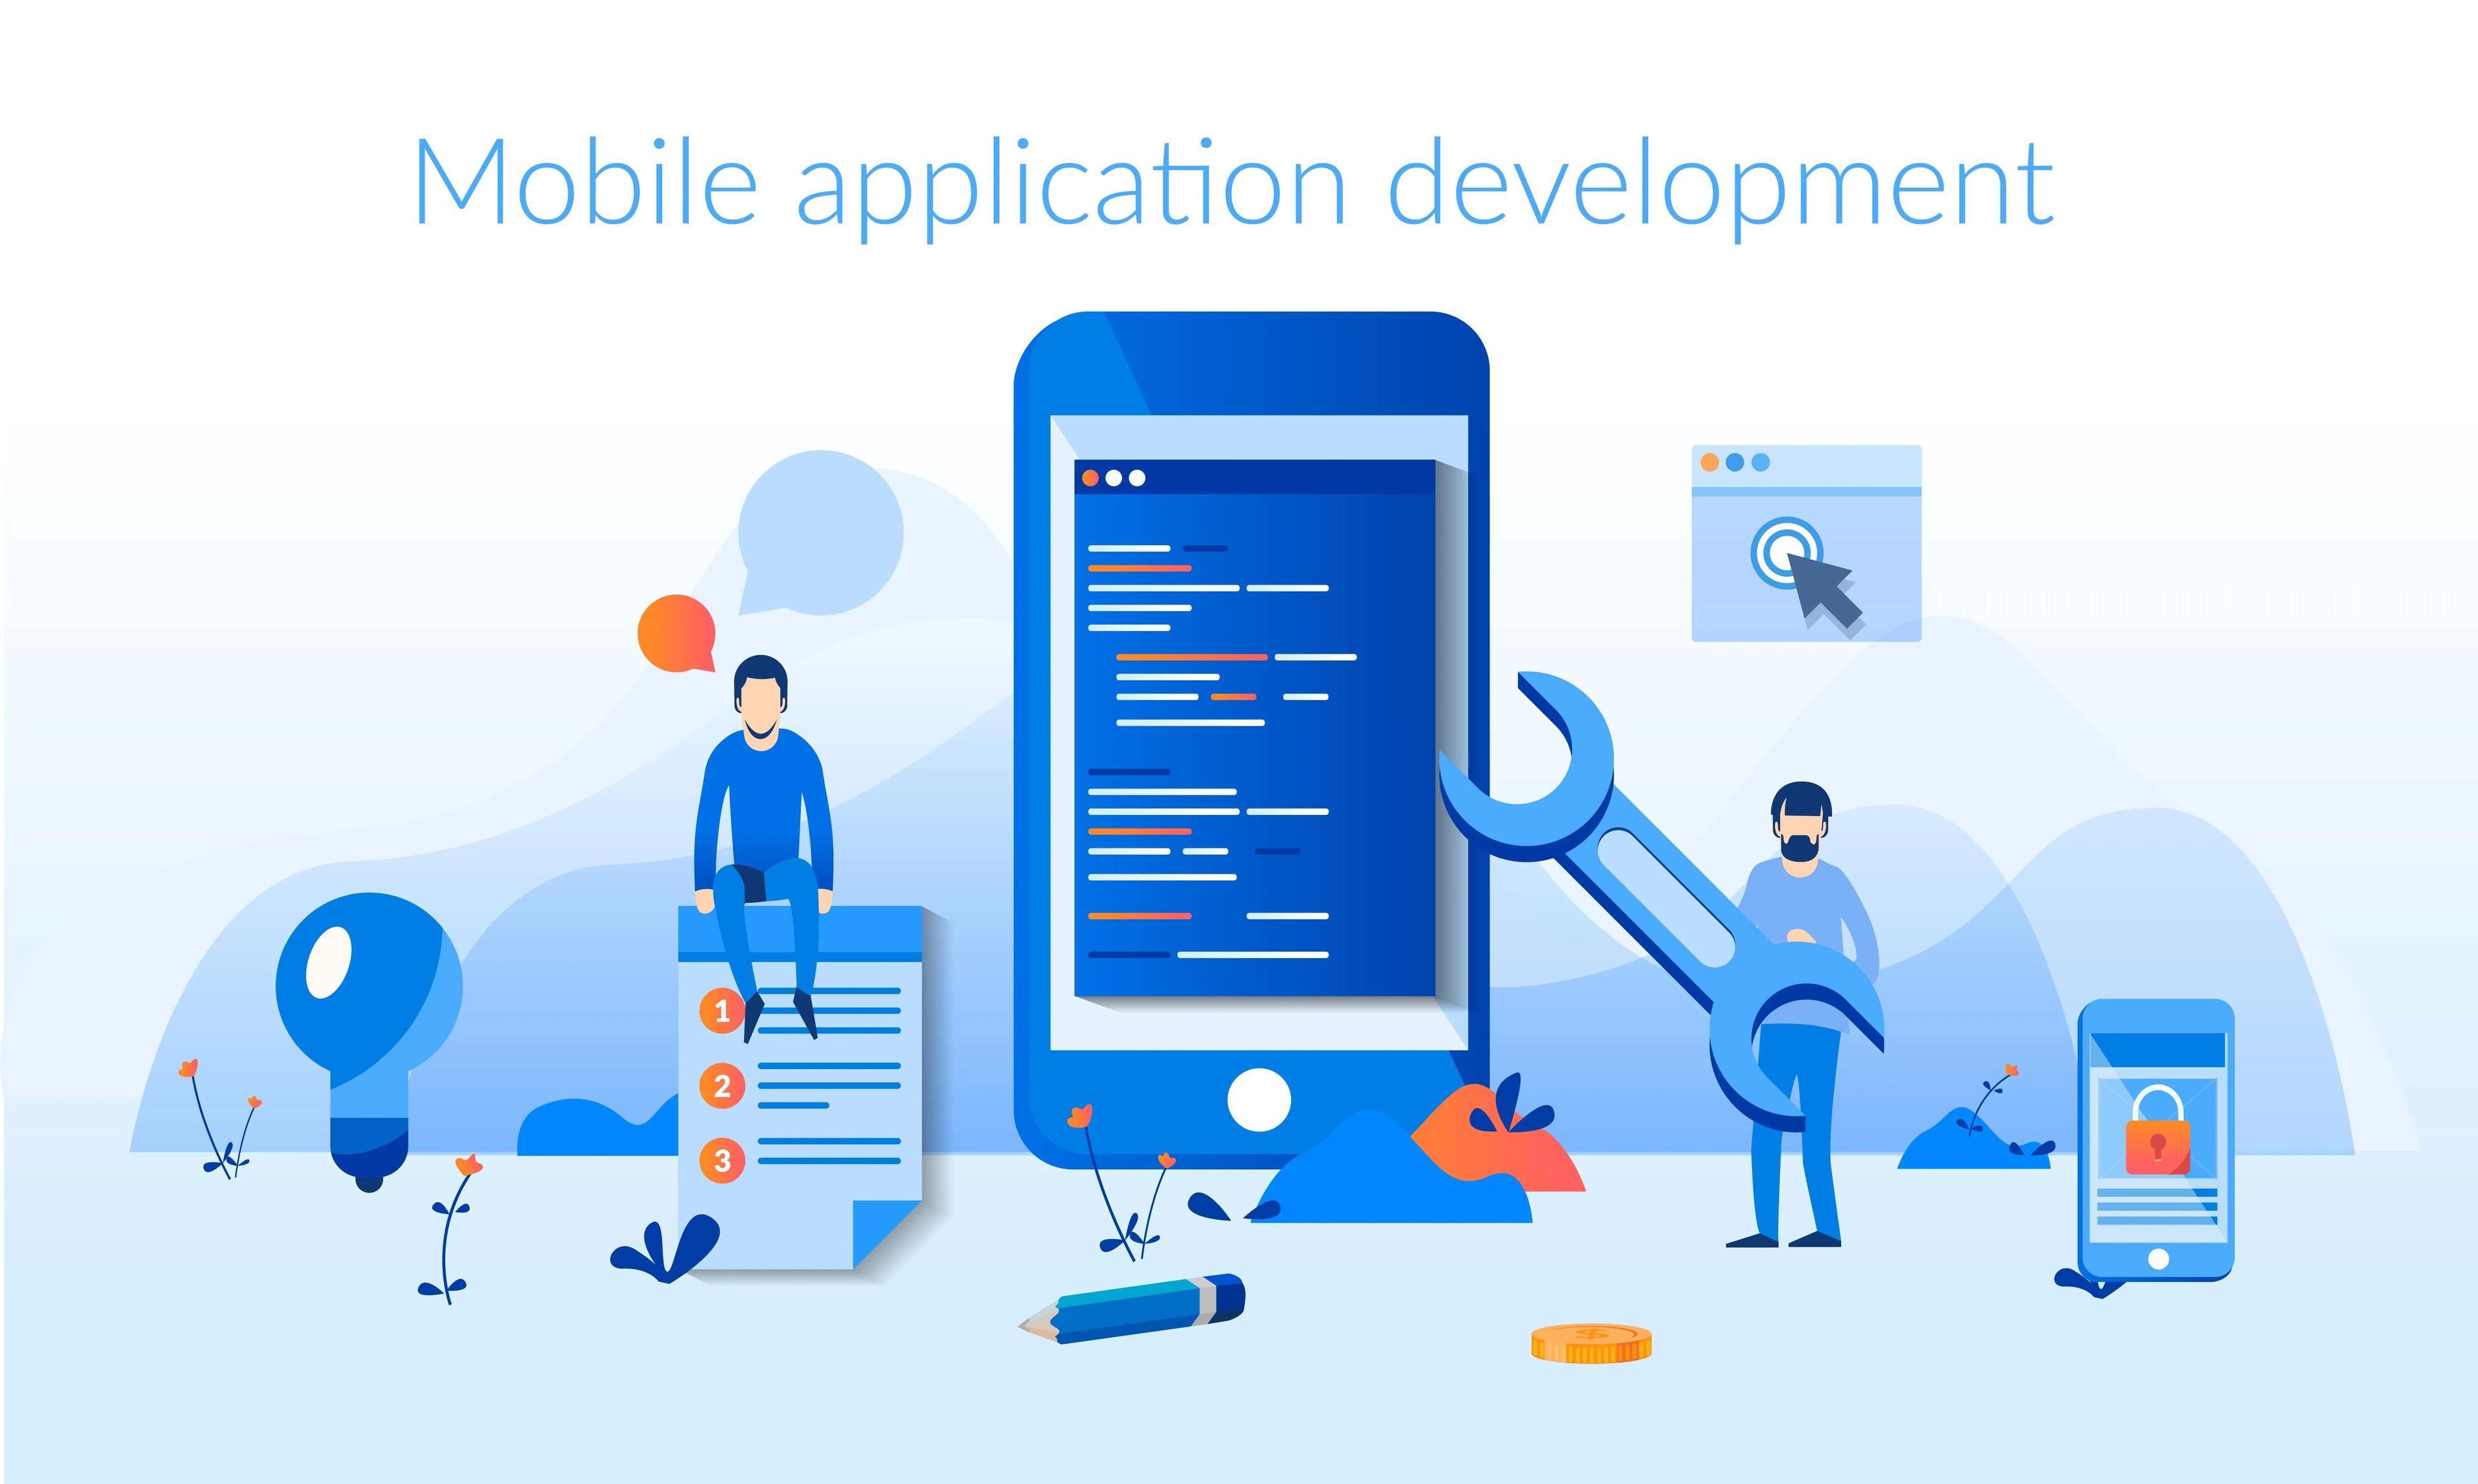 Hire mobile app developers